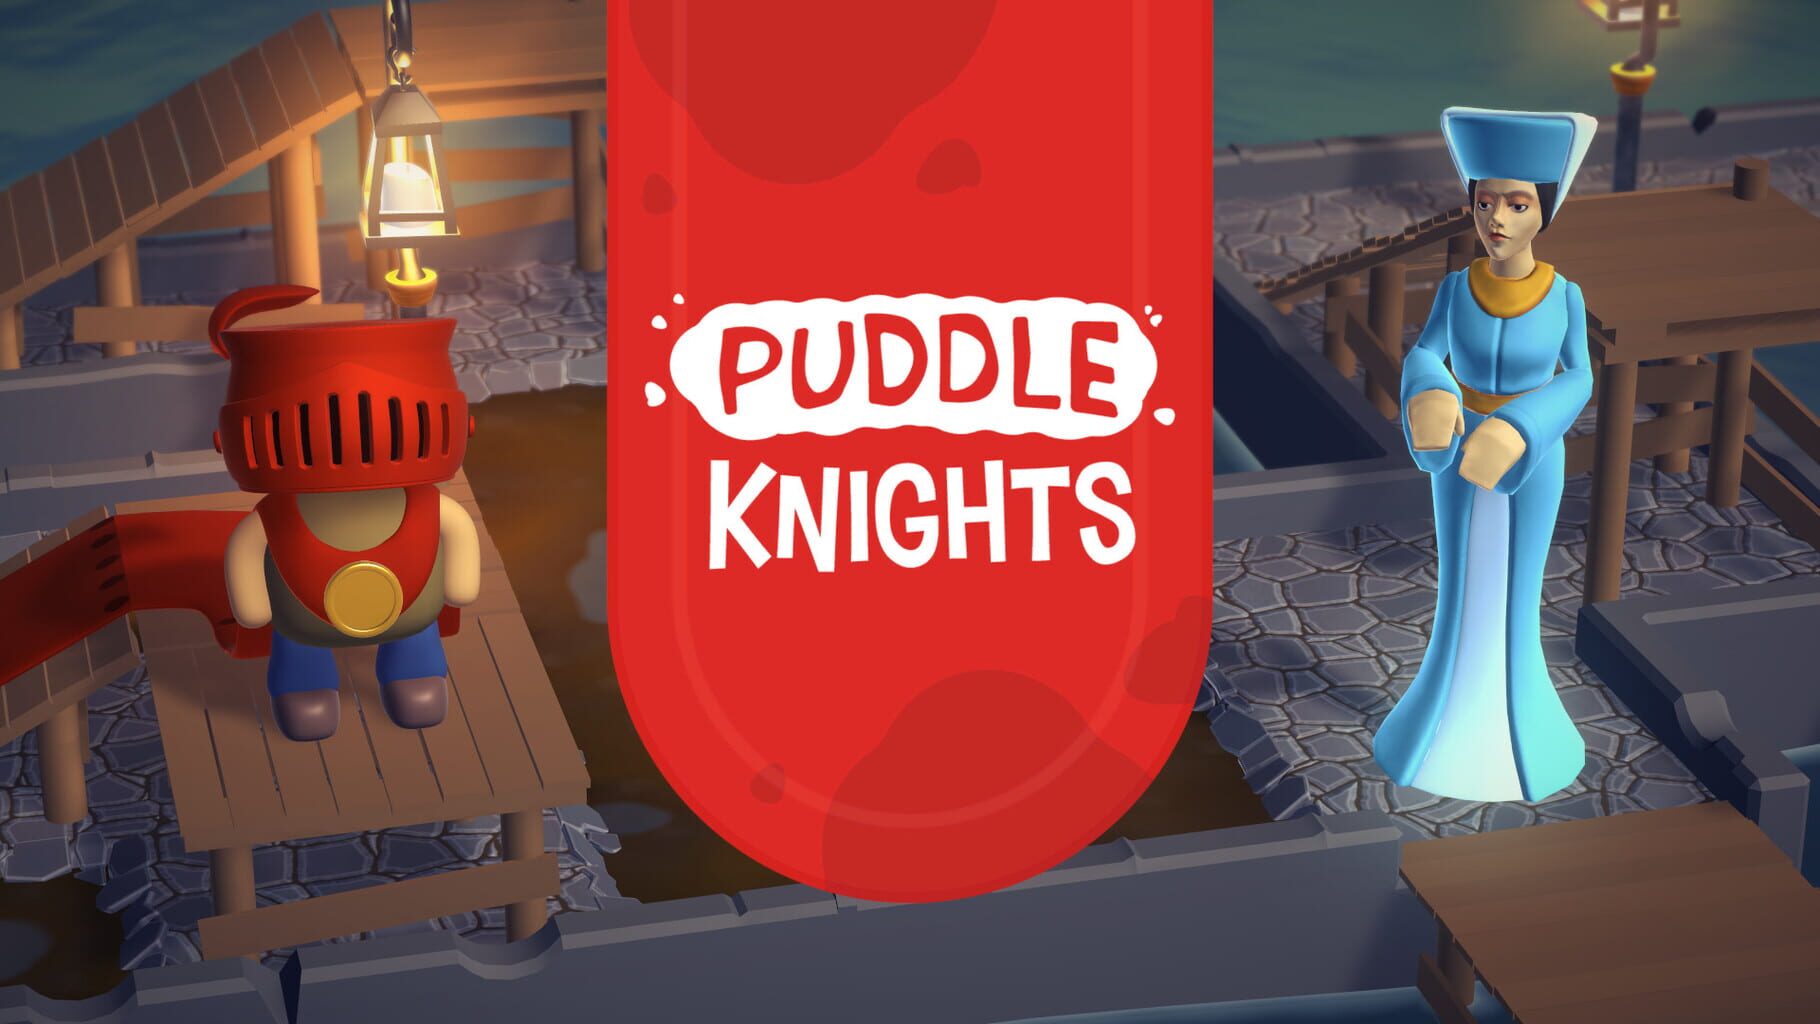 Puddle Knights artwork